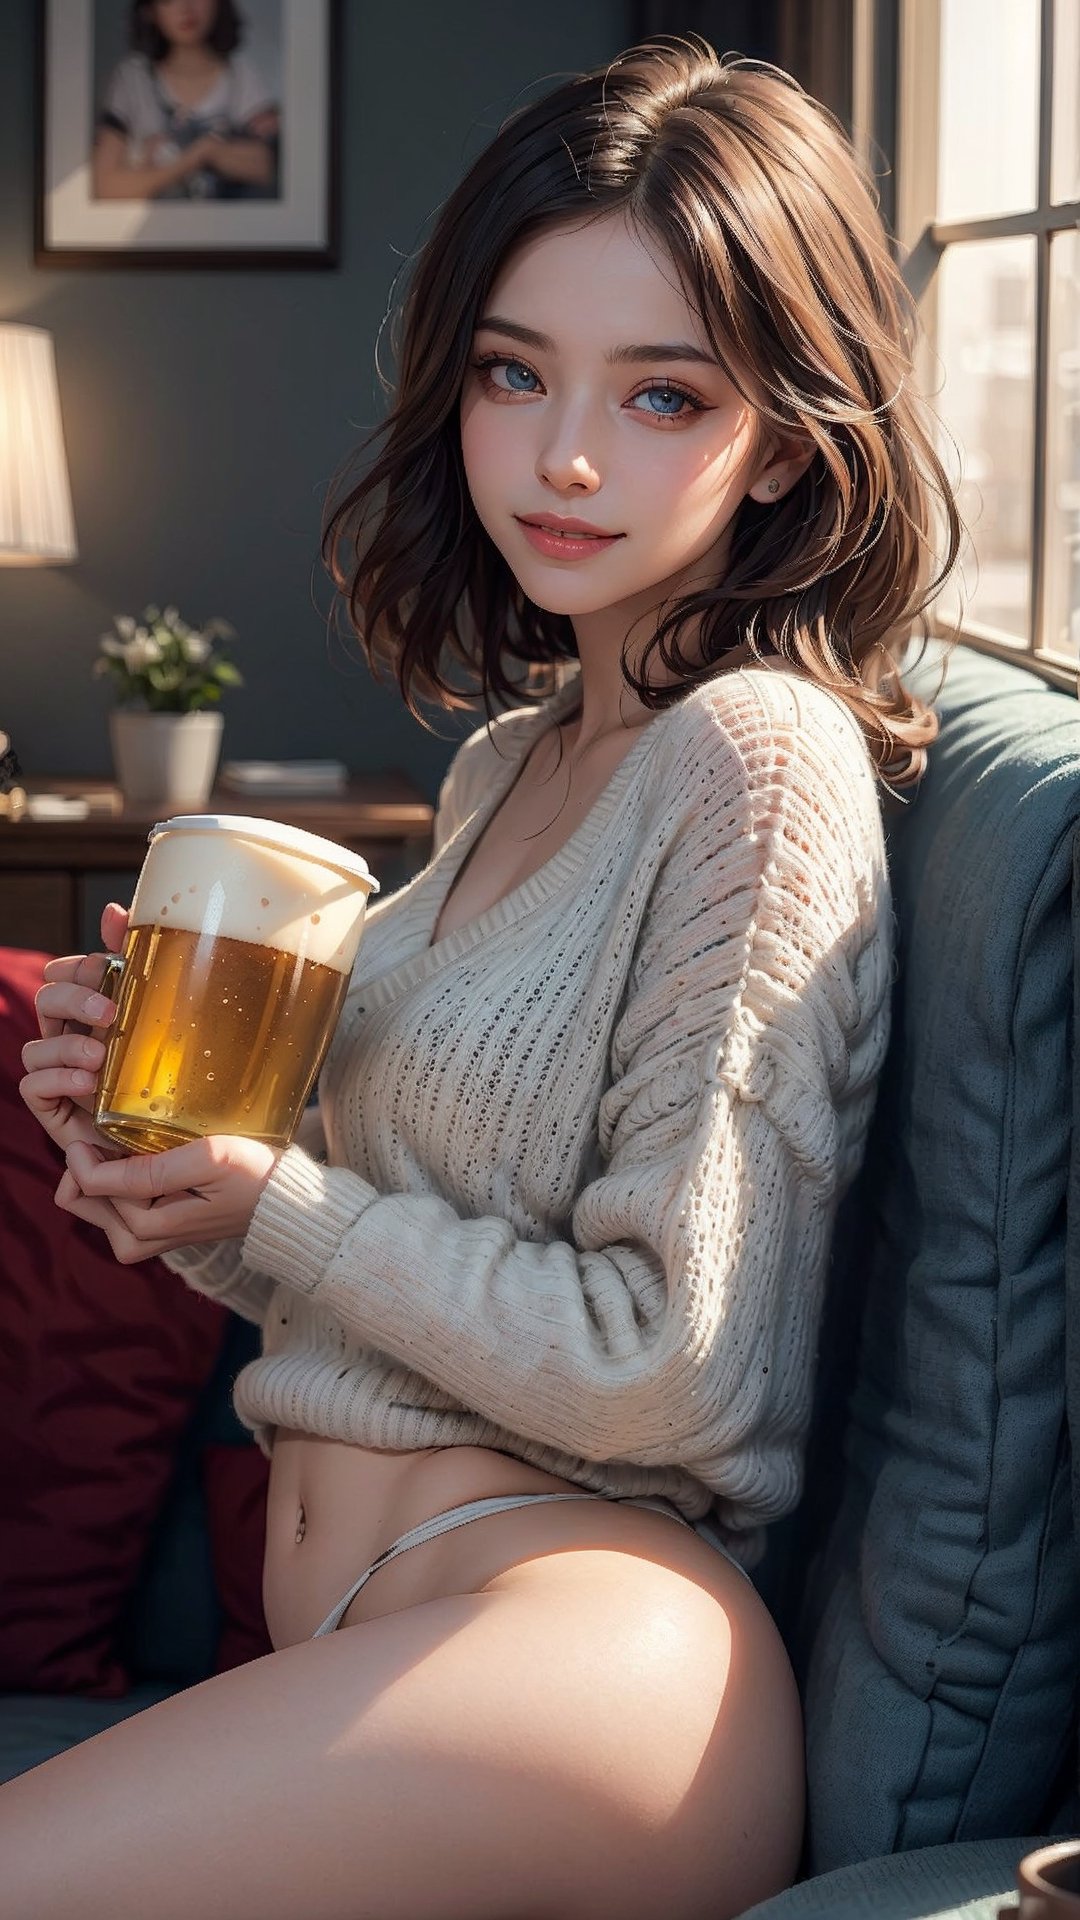 (1girl, drunk and sleeping on sofa, booty short, oversize sweater, medium breast, photo of perfecteyes eyes, alluring smile, beautiful small hands, holding a cup of beer, soft light in background), masterpiece, best quality, high resolution, UHD, realism, realistic, depth of field, wide view, raytraced, full length body, mystical, luminous, translucent, beautiful, stunning, a mythical being exuding energy, textures, breathtaking beauty, pure perfection, with a divine presence, unforgettable, and impressive.